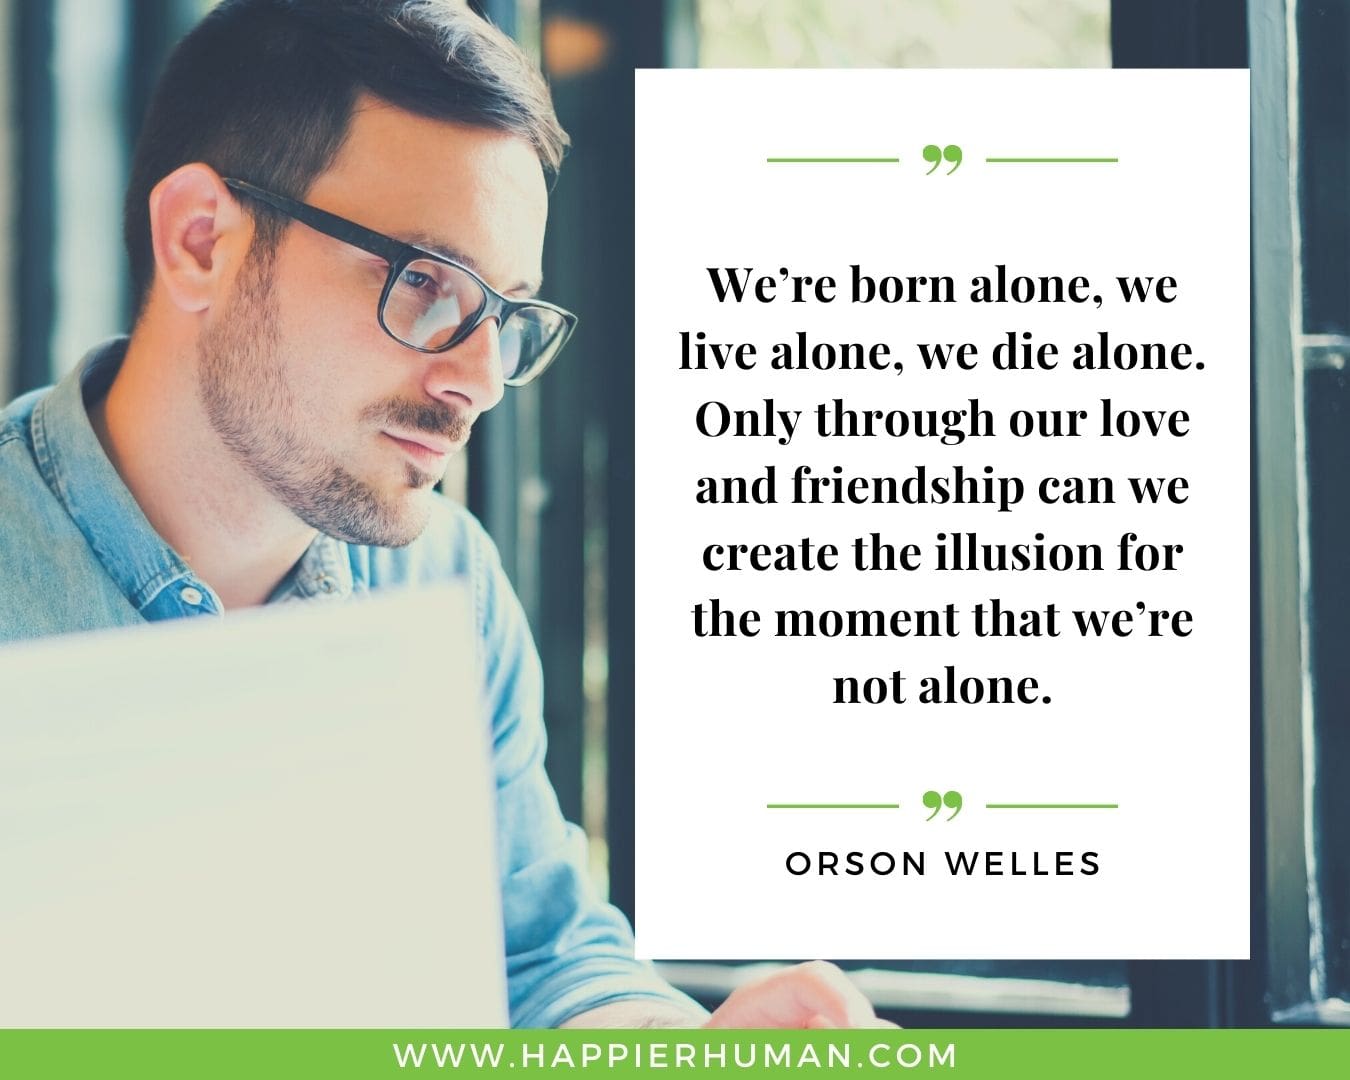 Loneliness Quotes - “We’re born alone, we live alone, we die alone. Only through our love and friendship can we create the illusion for the moment that we’re not alone.”– Orson Welles